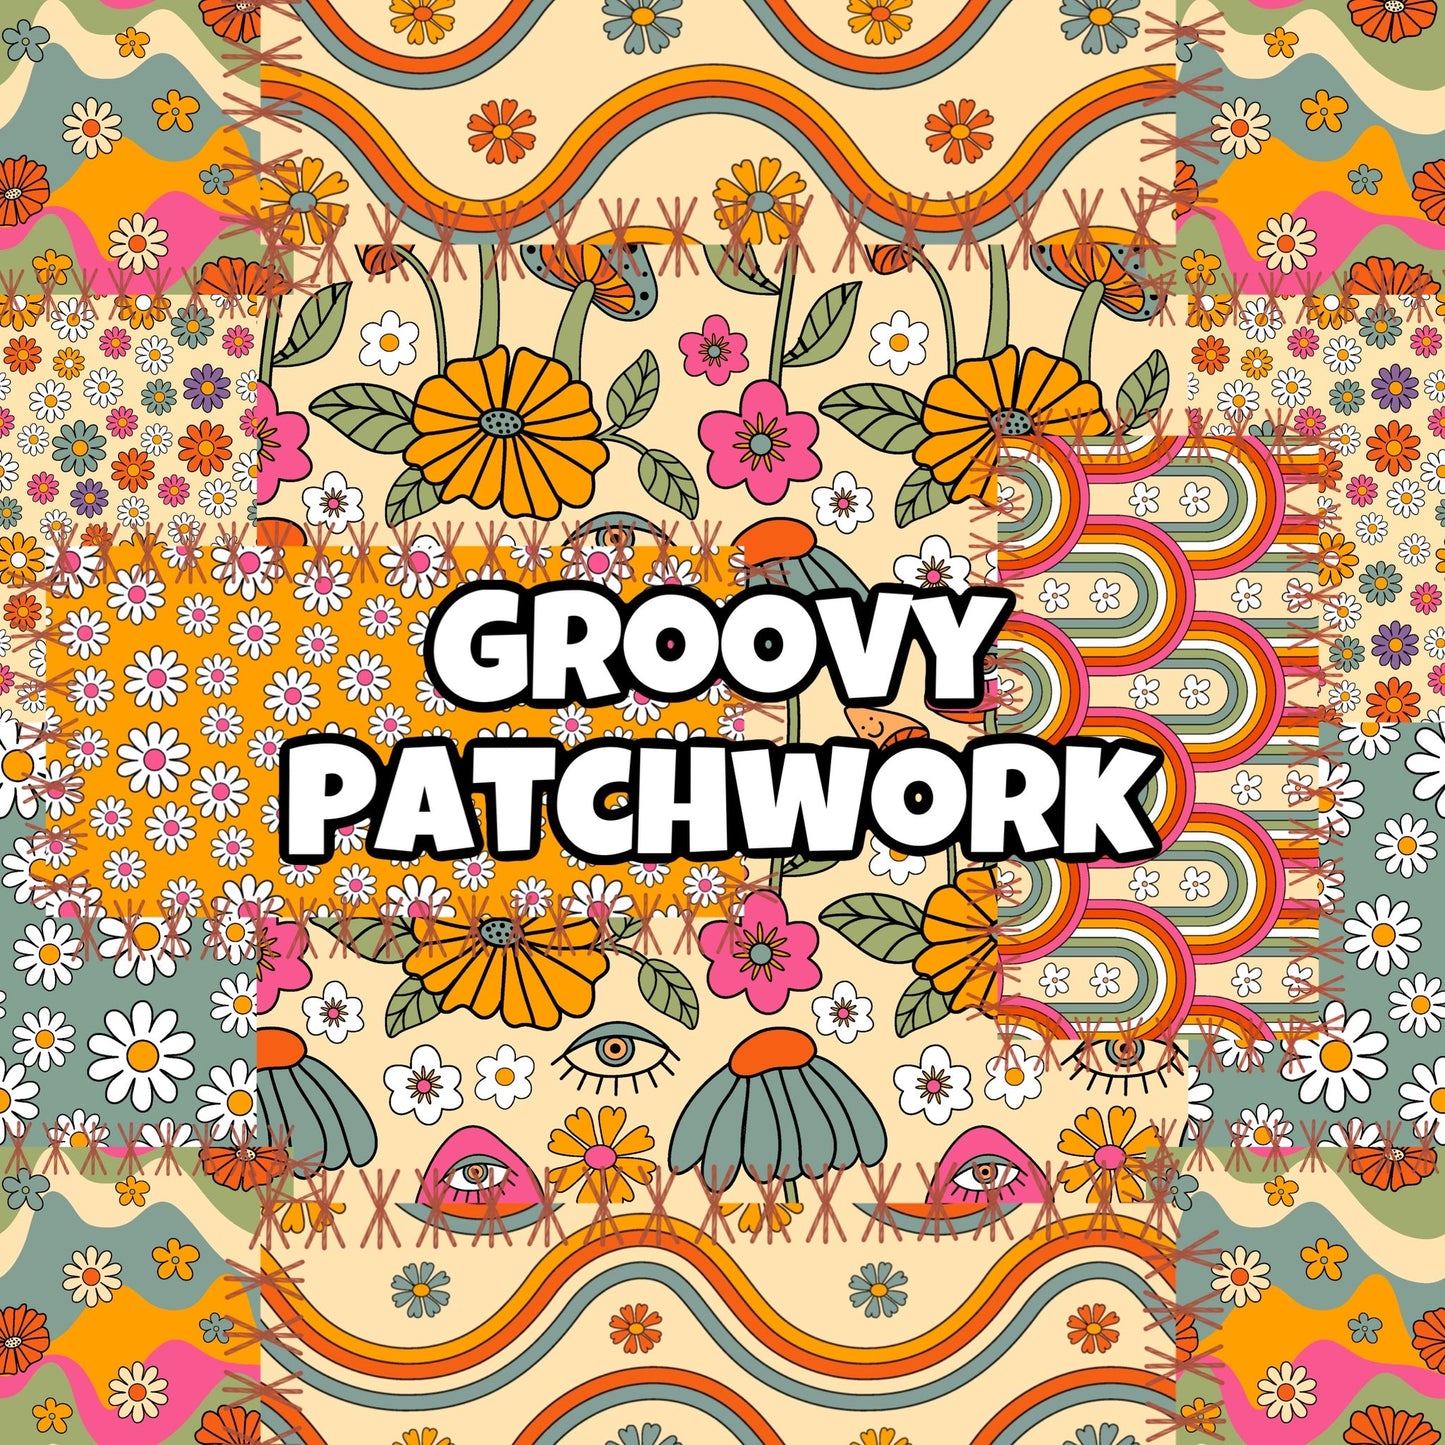 GROOVY PATCHWORK